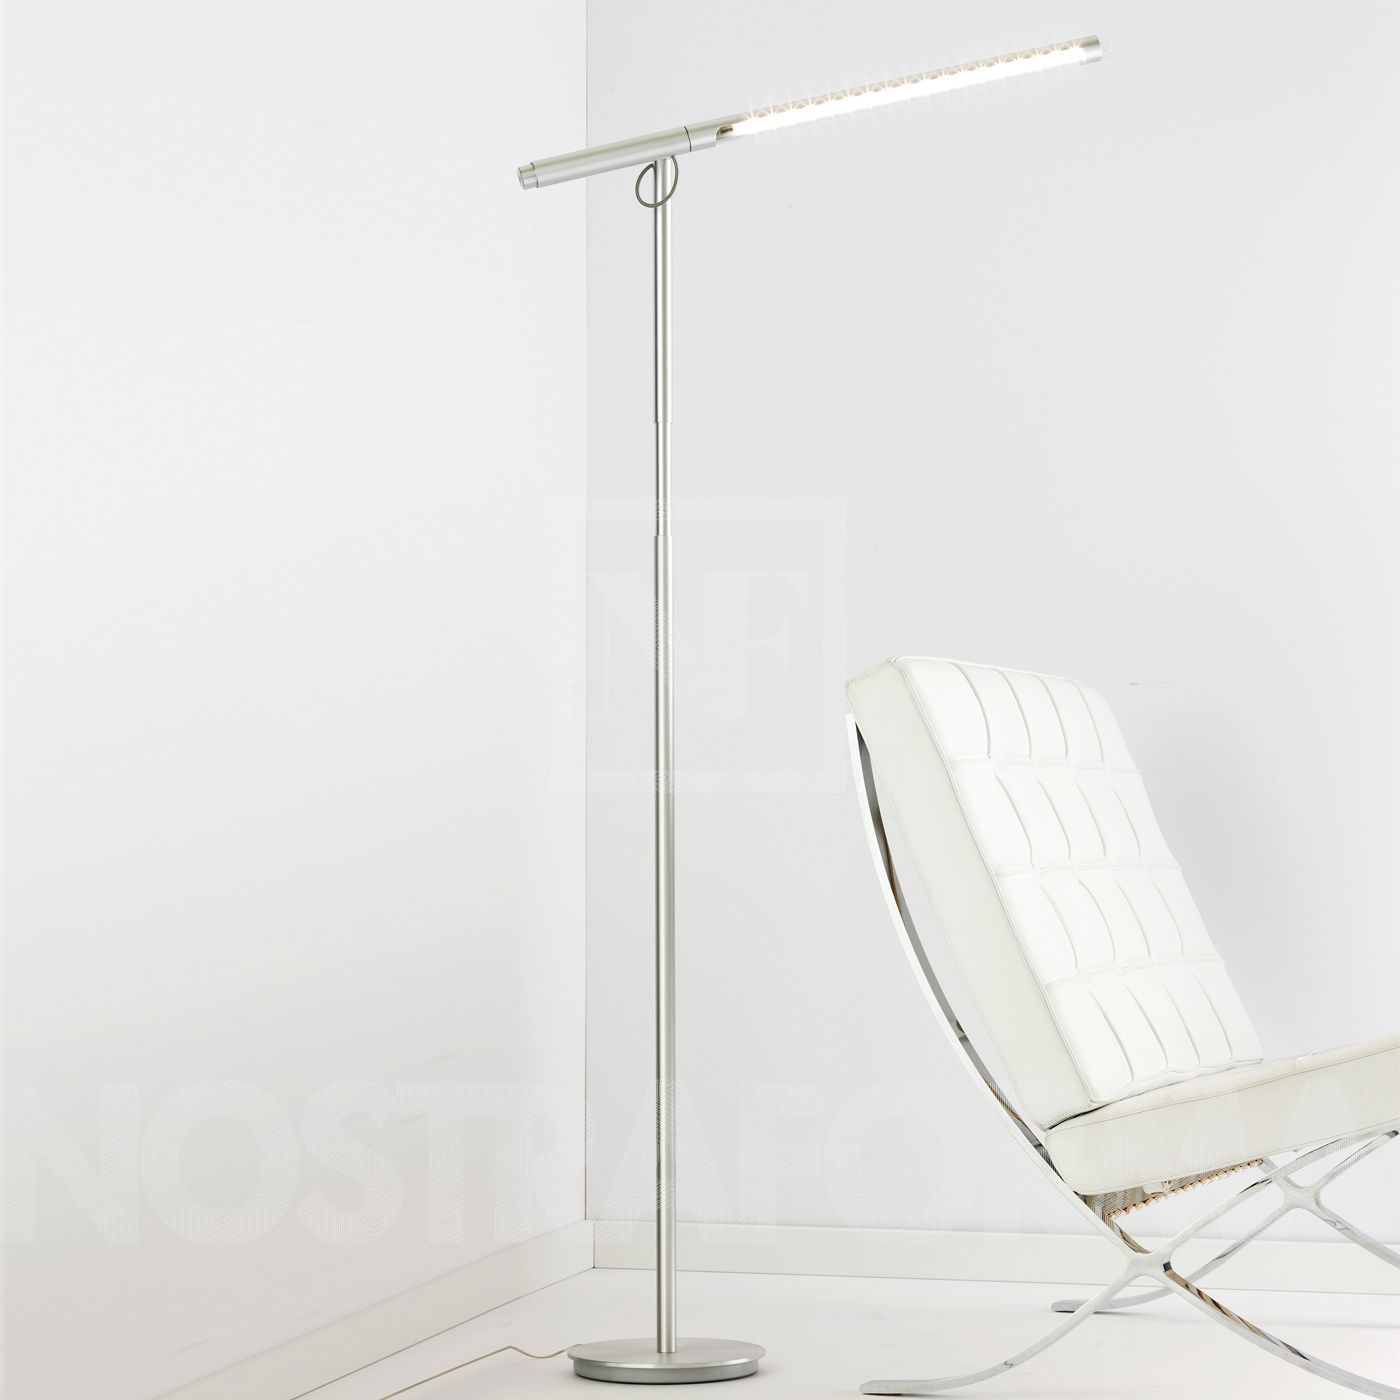 Pablo Designs Brazo Floor Lamp intended for sizing 1400 X 1400